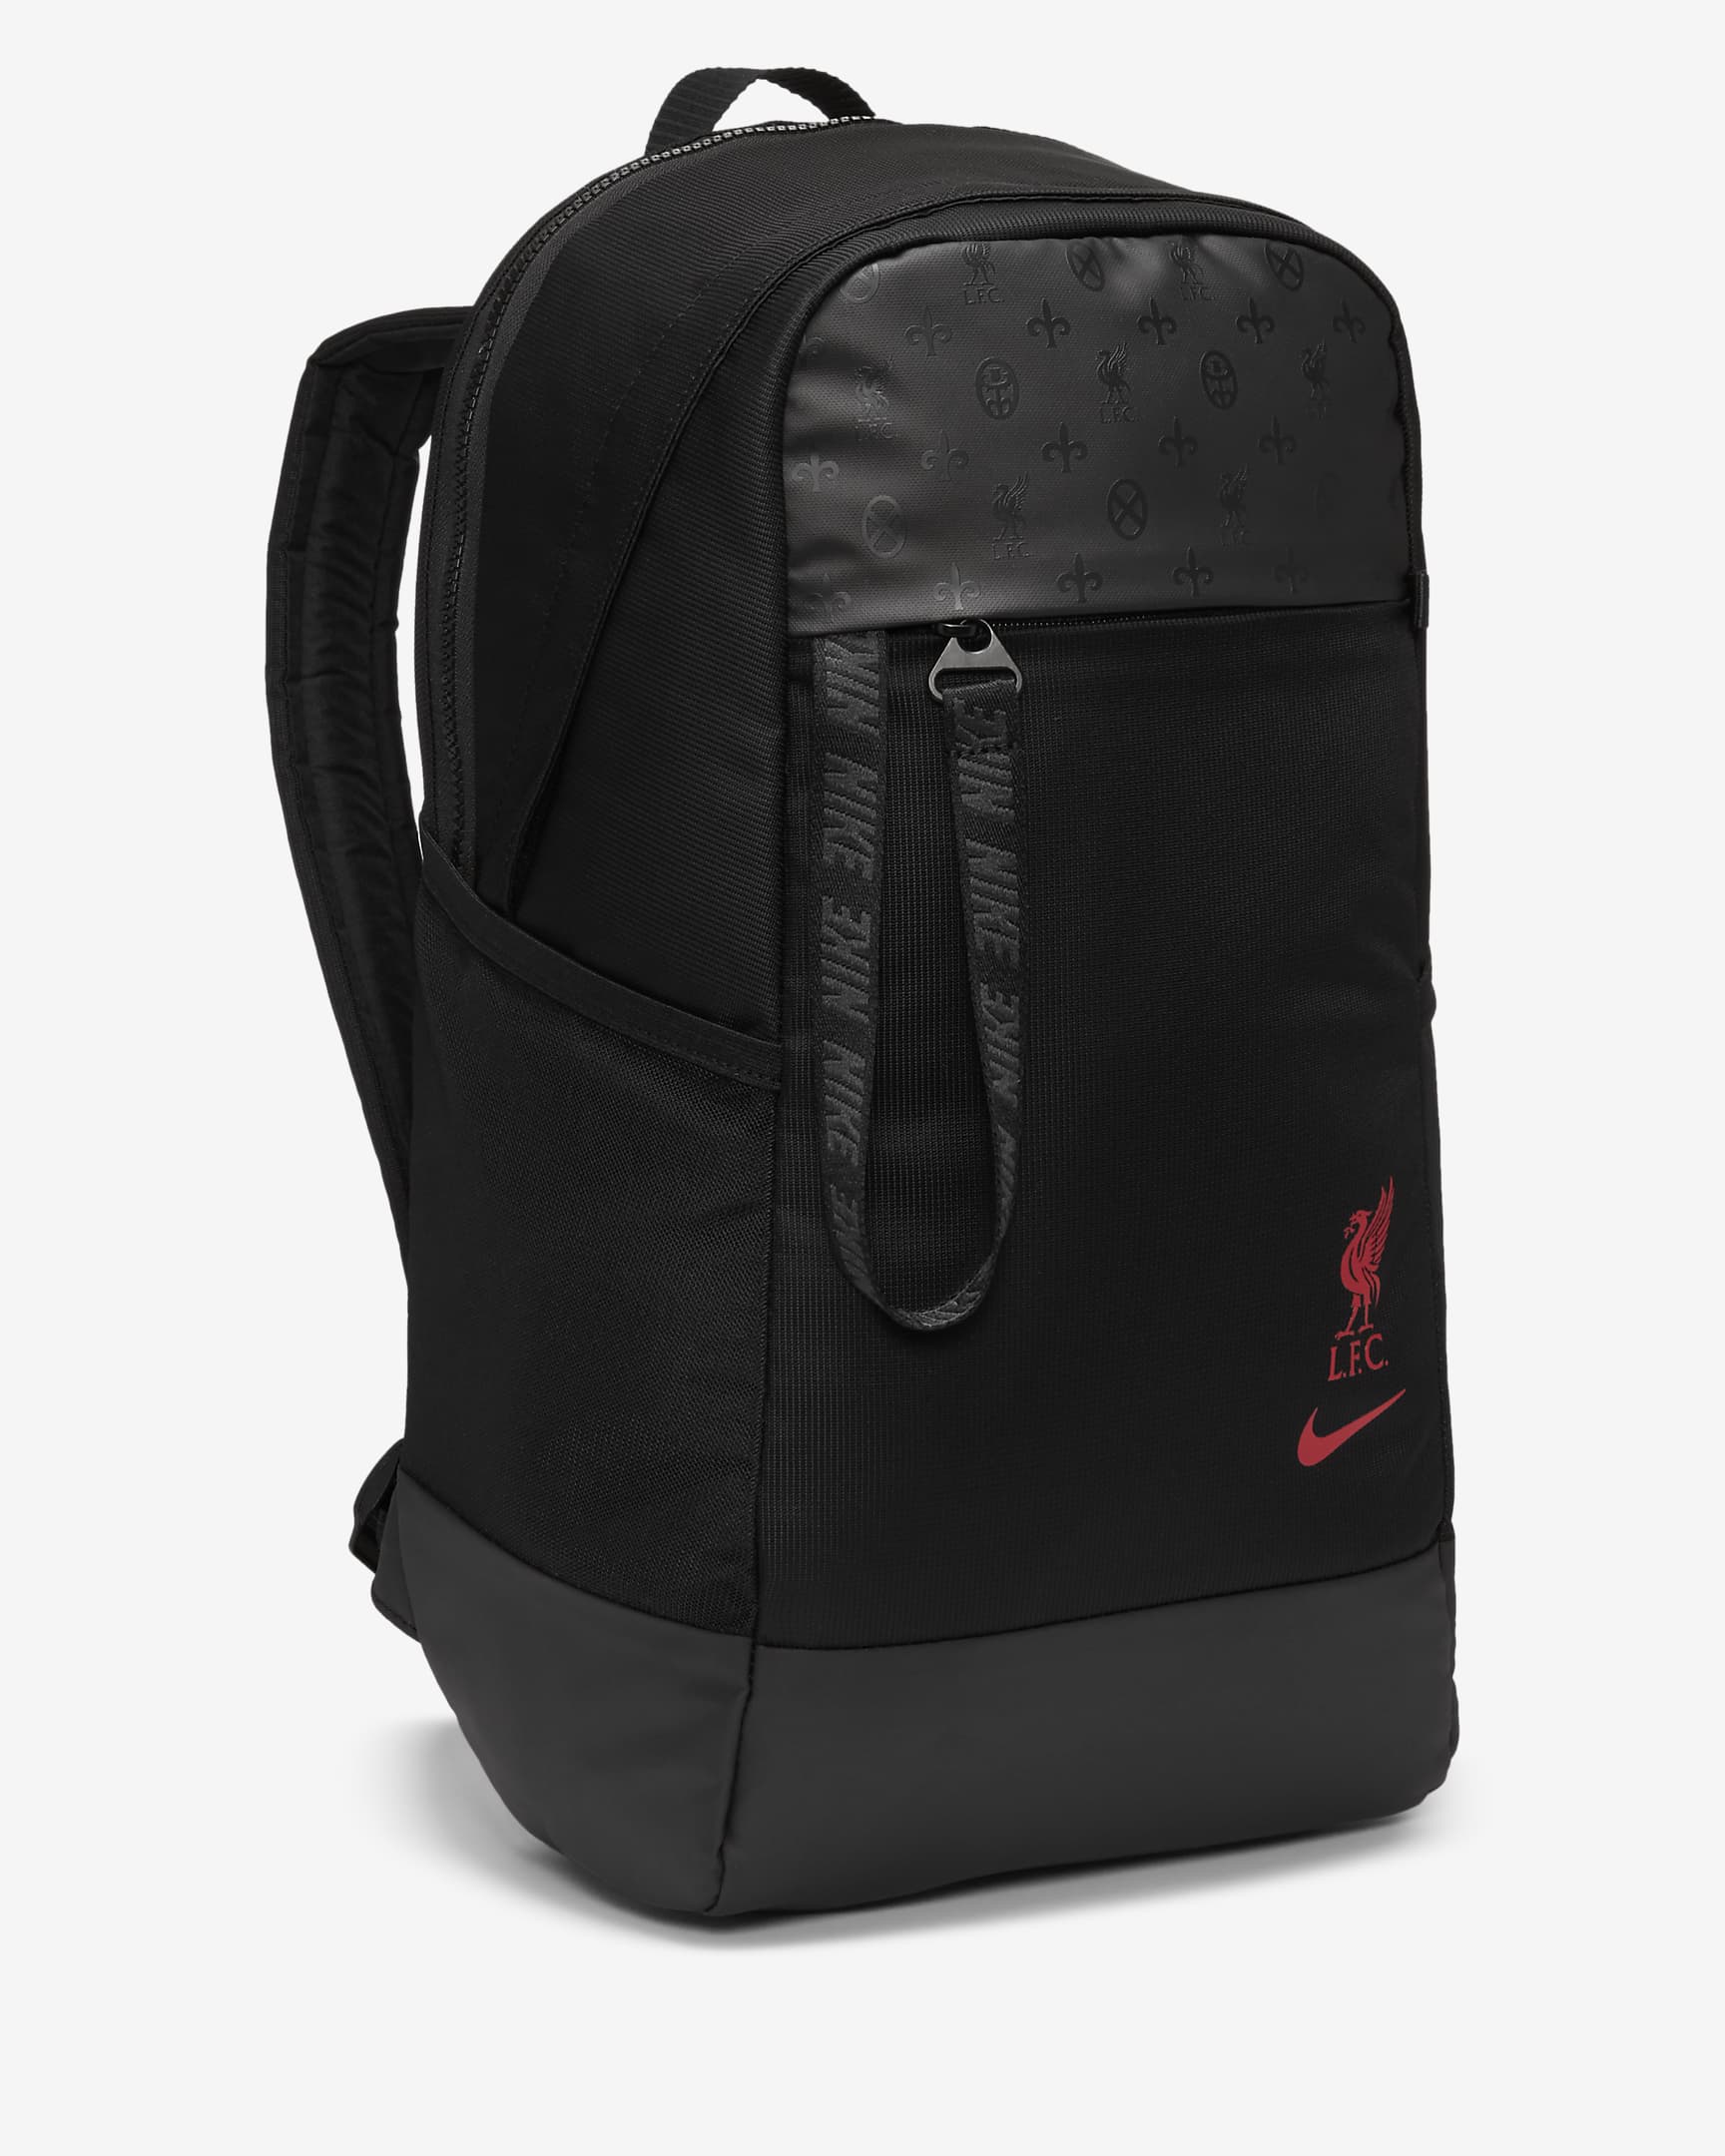 Liverpool F.C. Football Backpack - Black/Gym Red/Gym Red